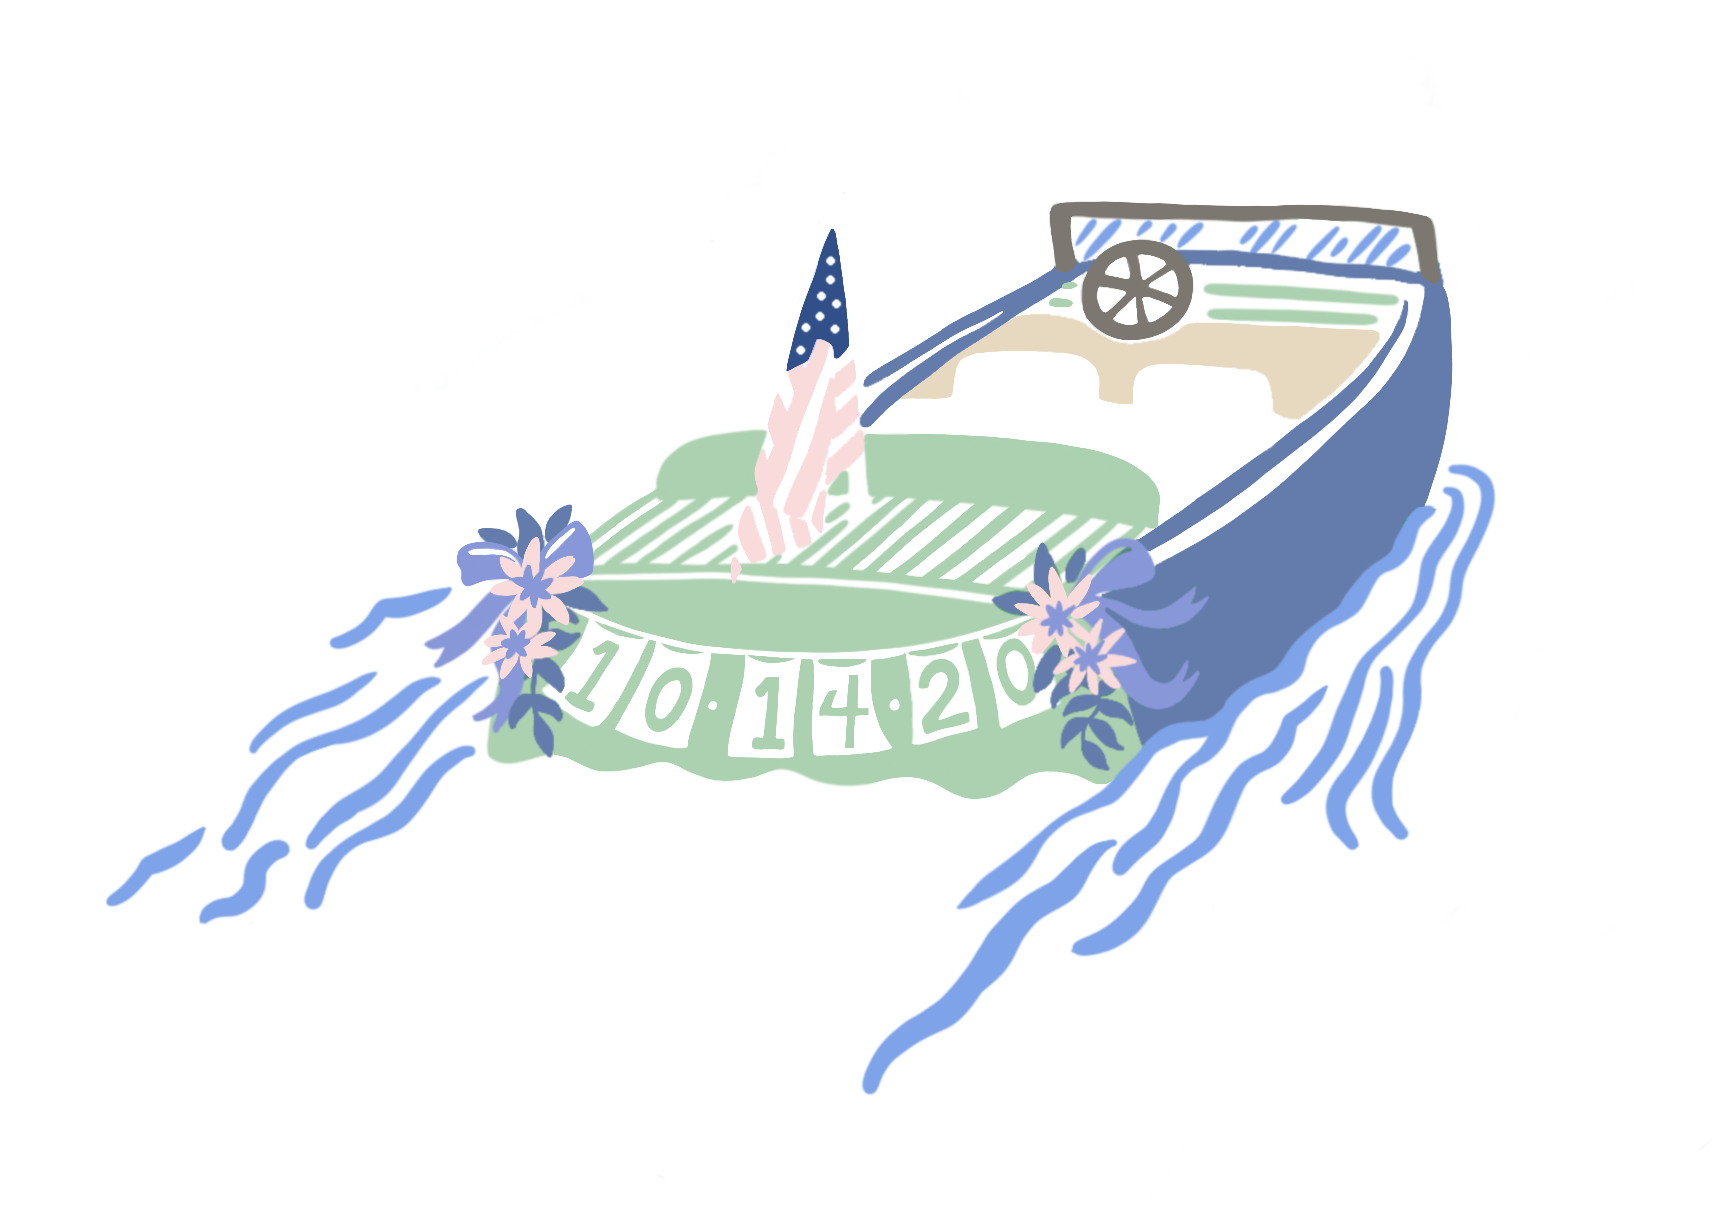 Giui_Boat revised.png